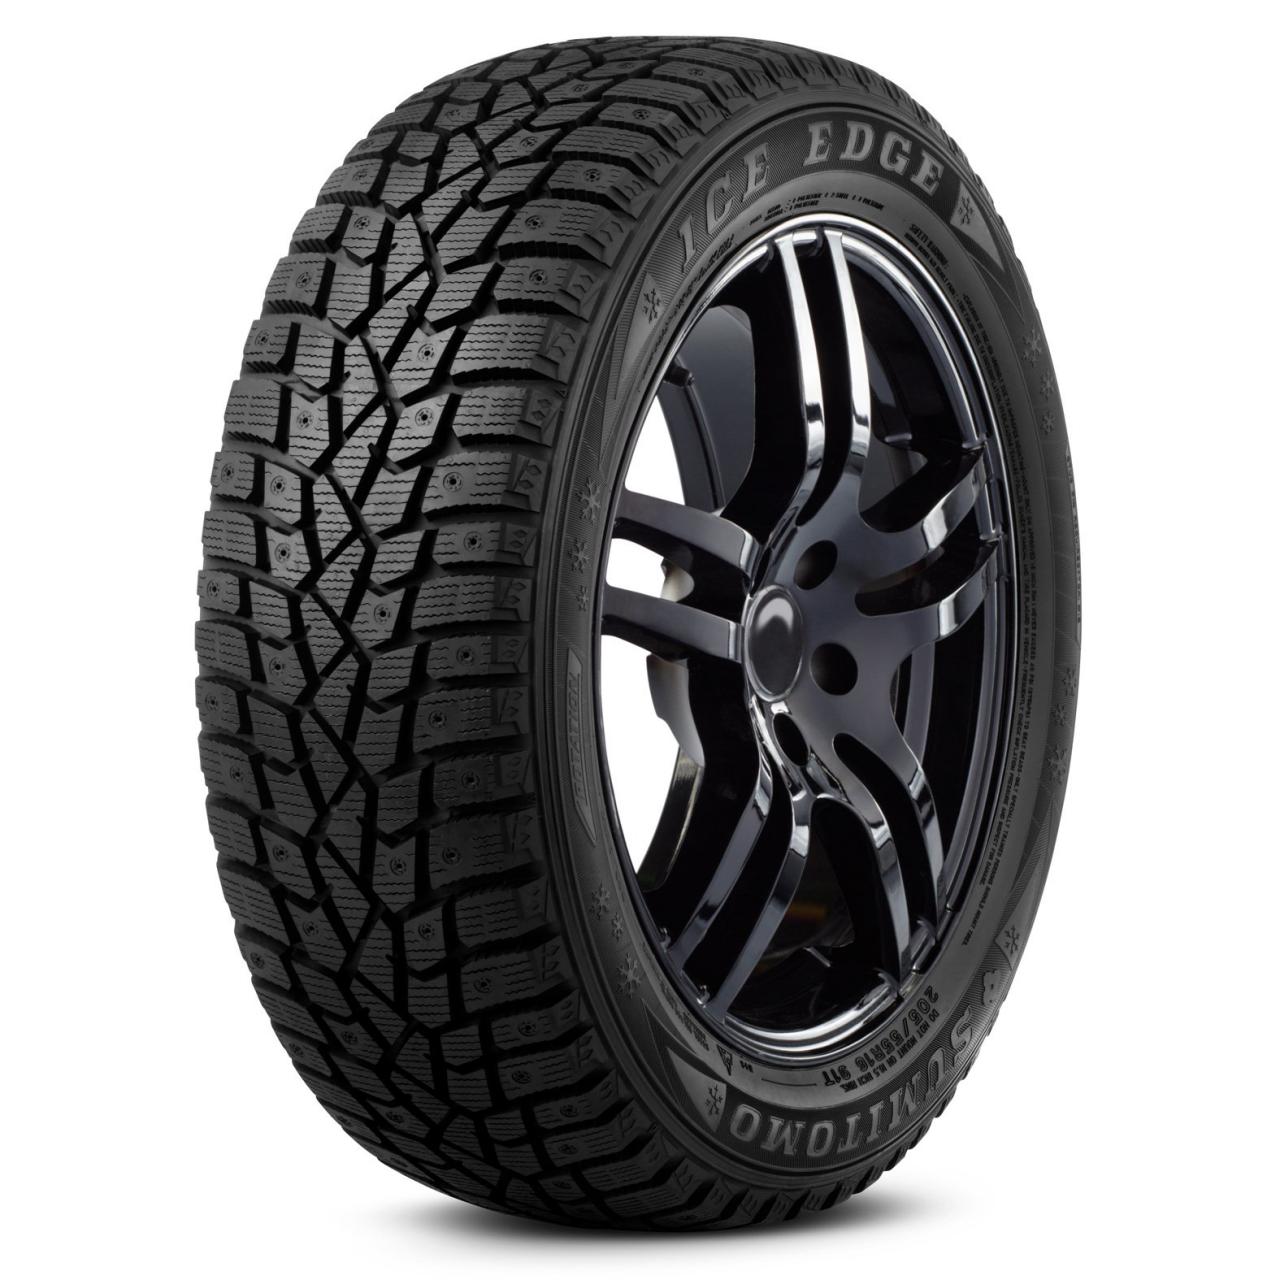 Sumitomo Ice Edge Tire: rating, overview, videos, reviews, available sizes  and specifications